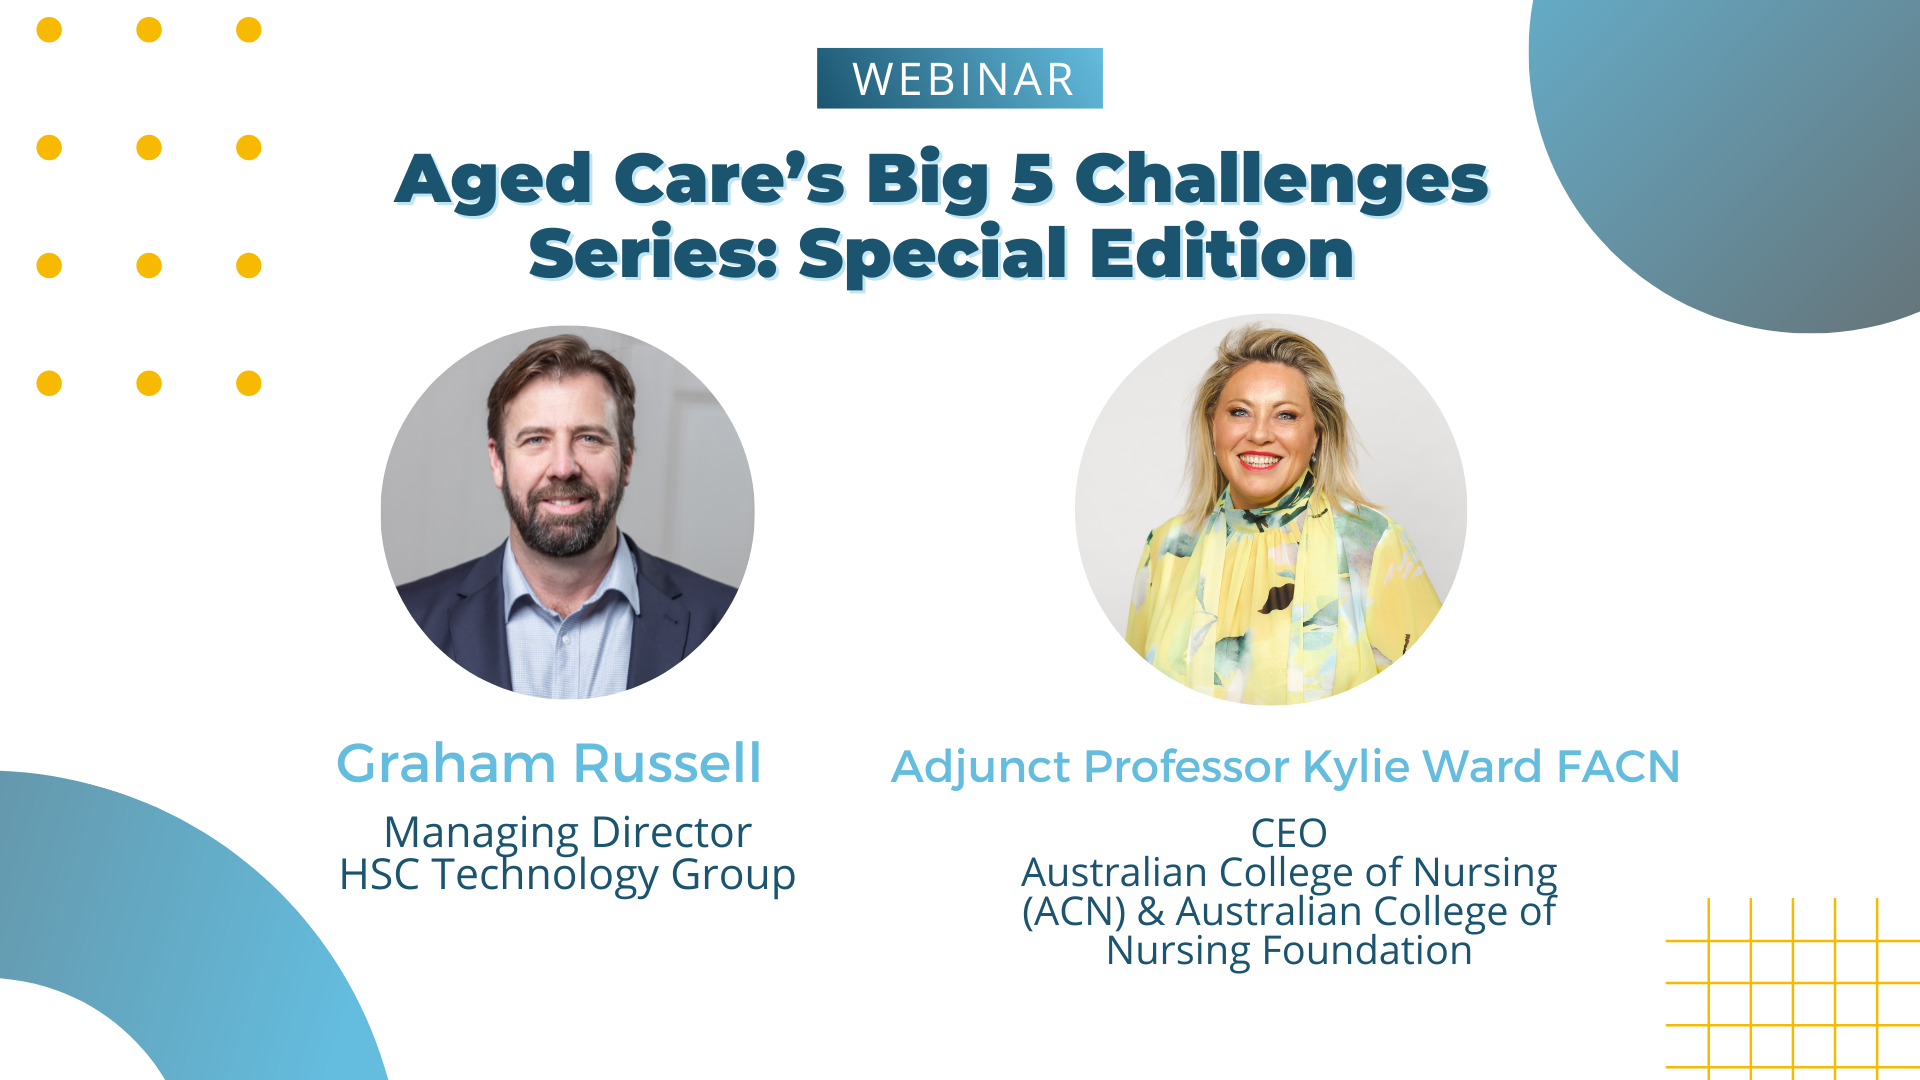 aged care's big 5 challenges webinar Special Edition